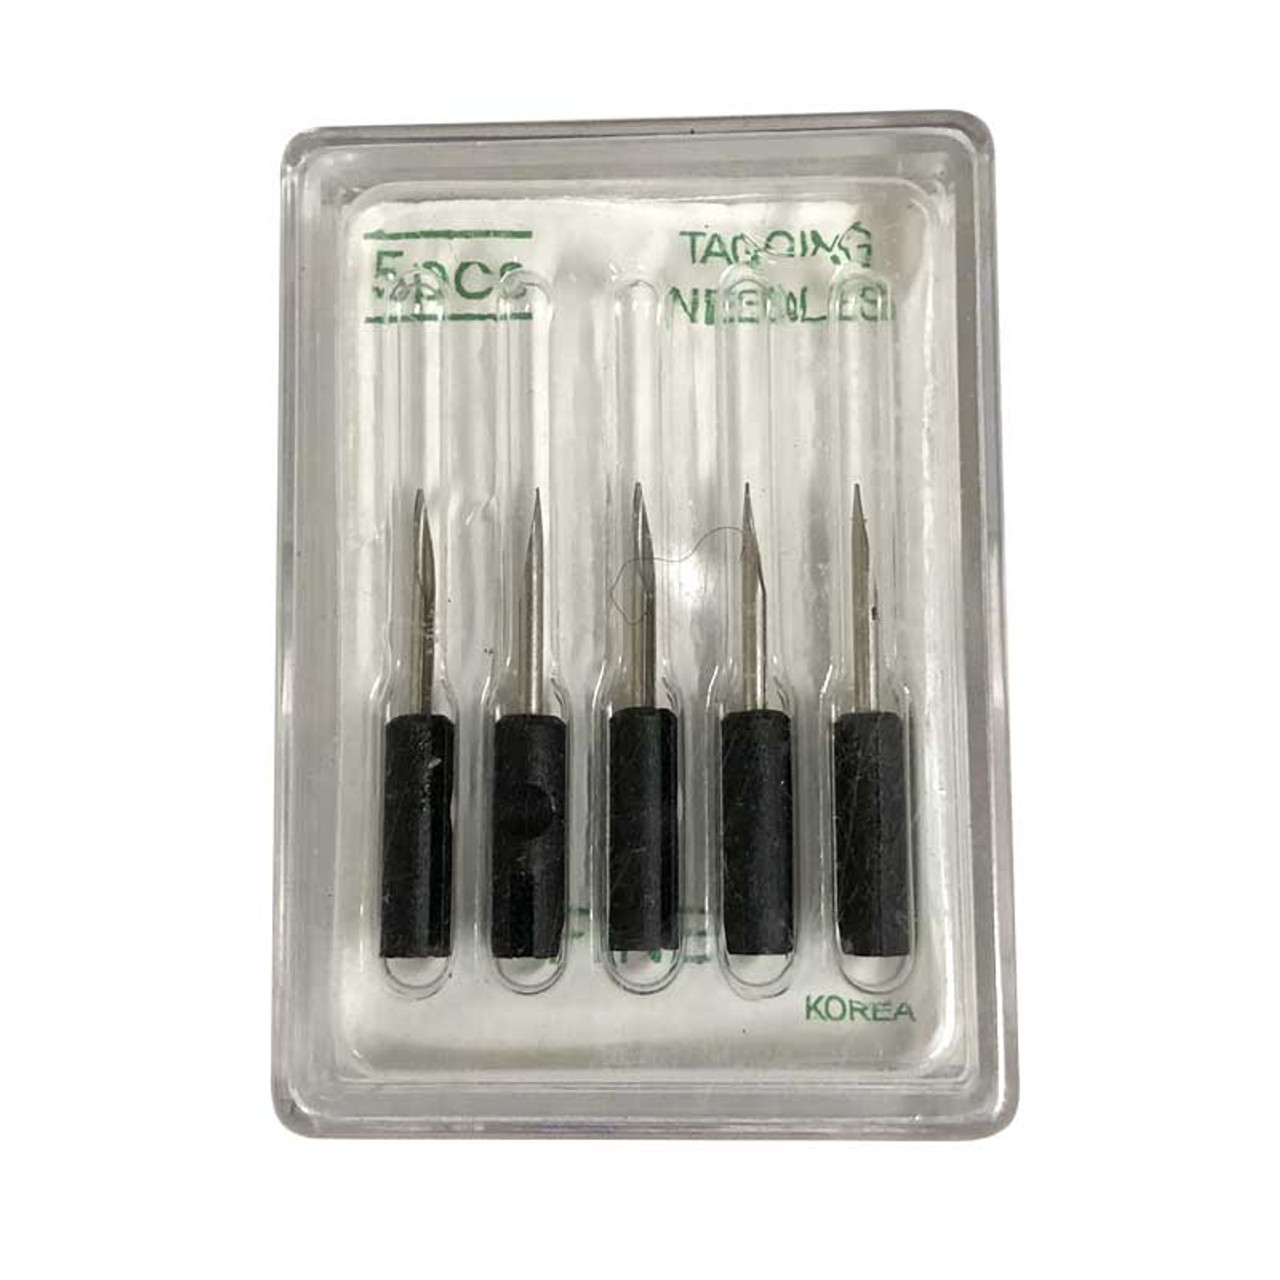 Motex Fine Fabric replacement needles (5) - Limited Quanitities